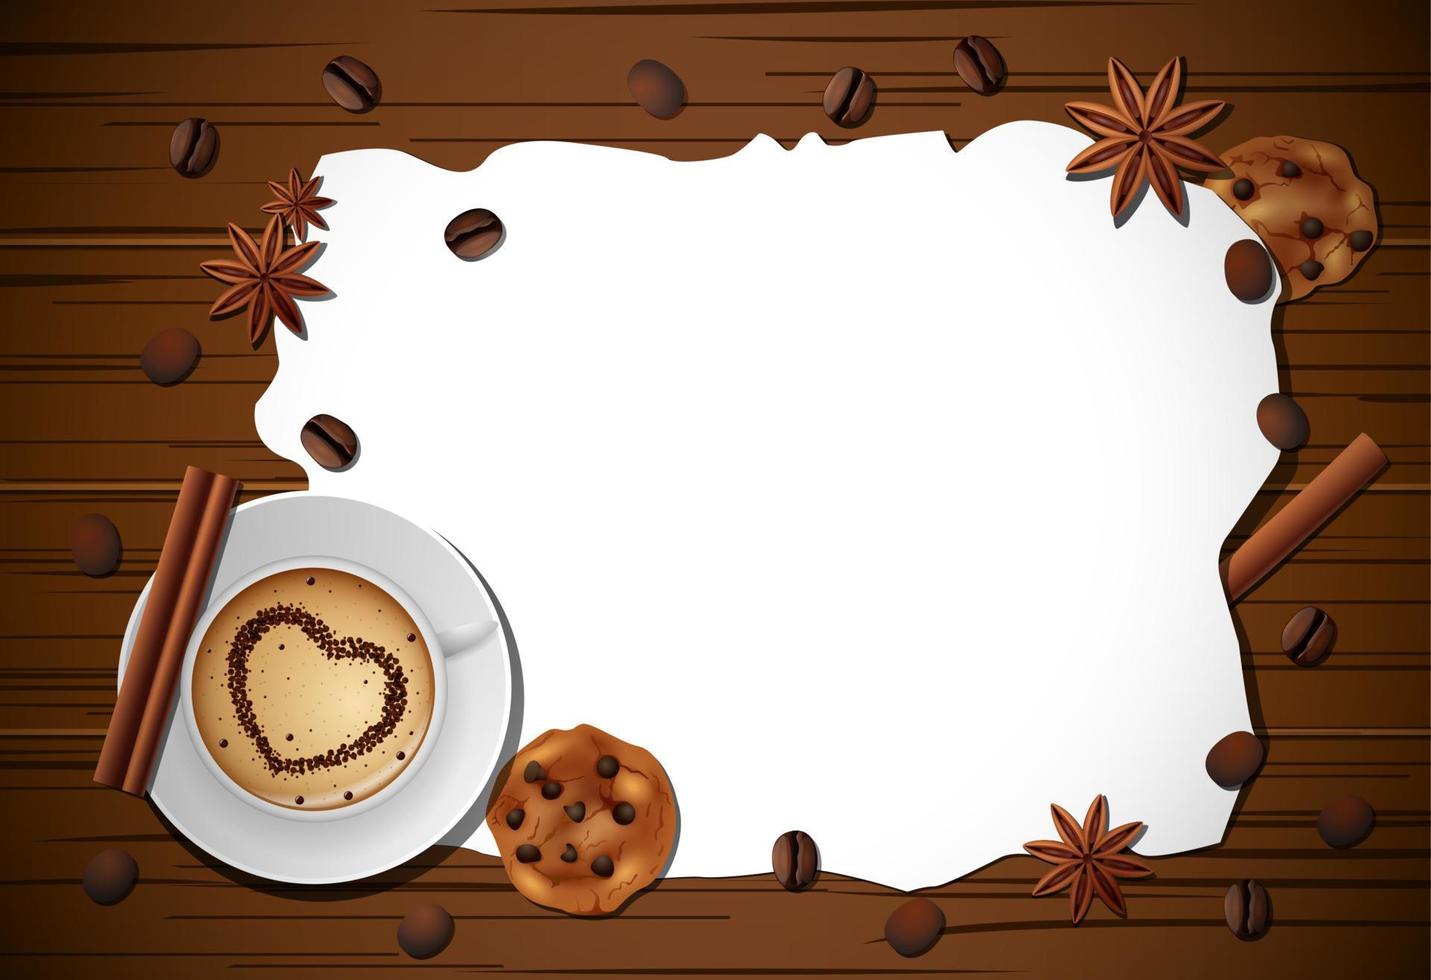 Vintage frame with cup of coffee, cinnamon, and biscuit on wooden table vector